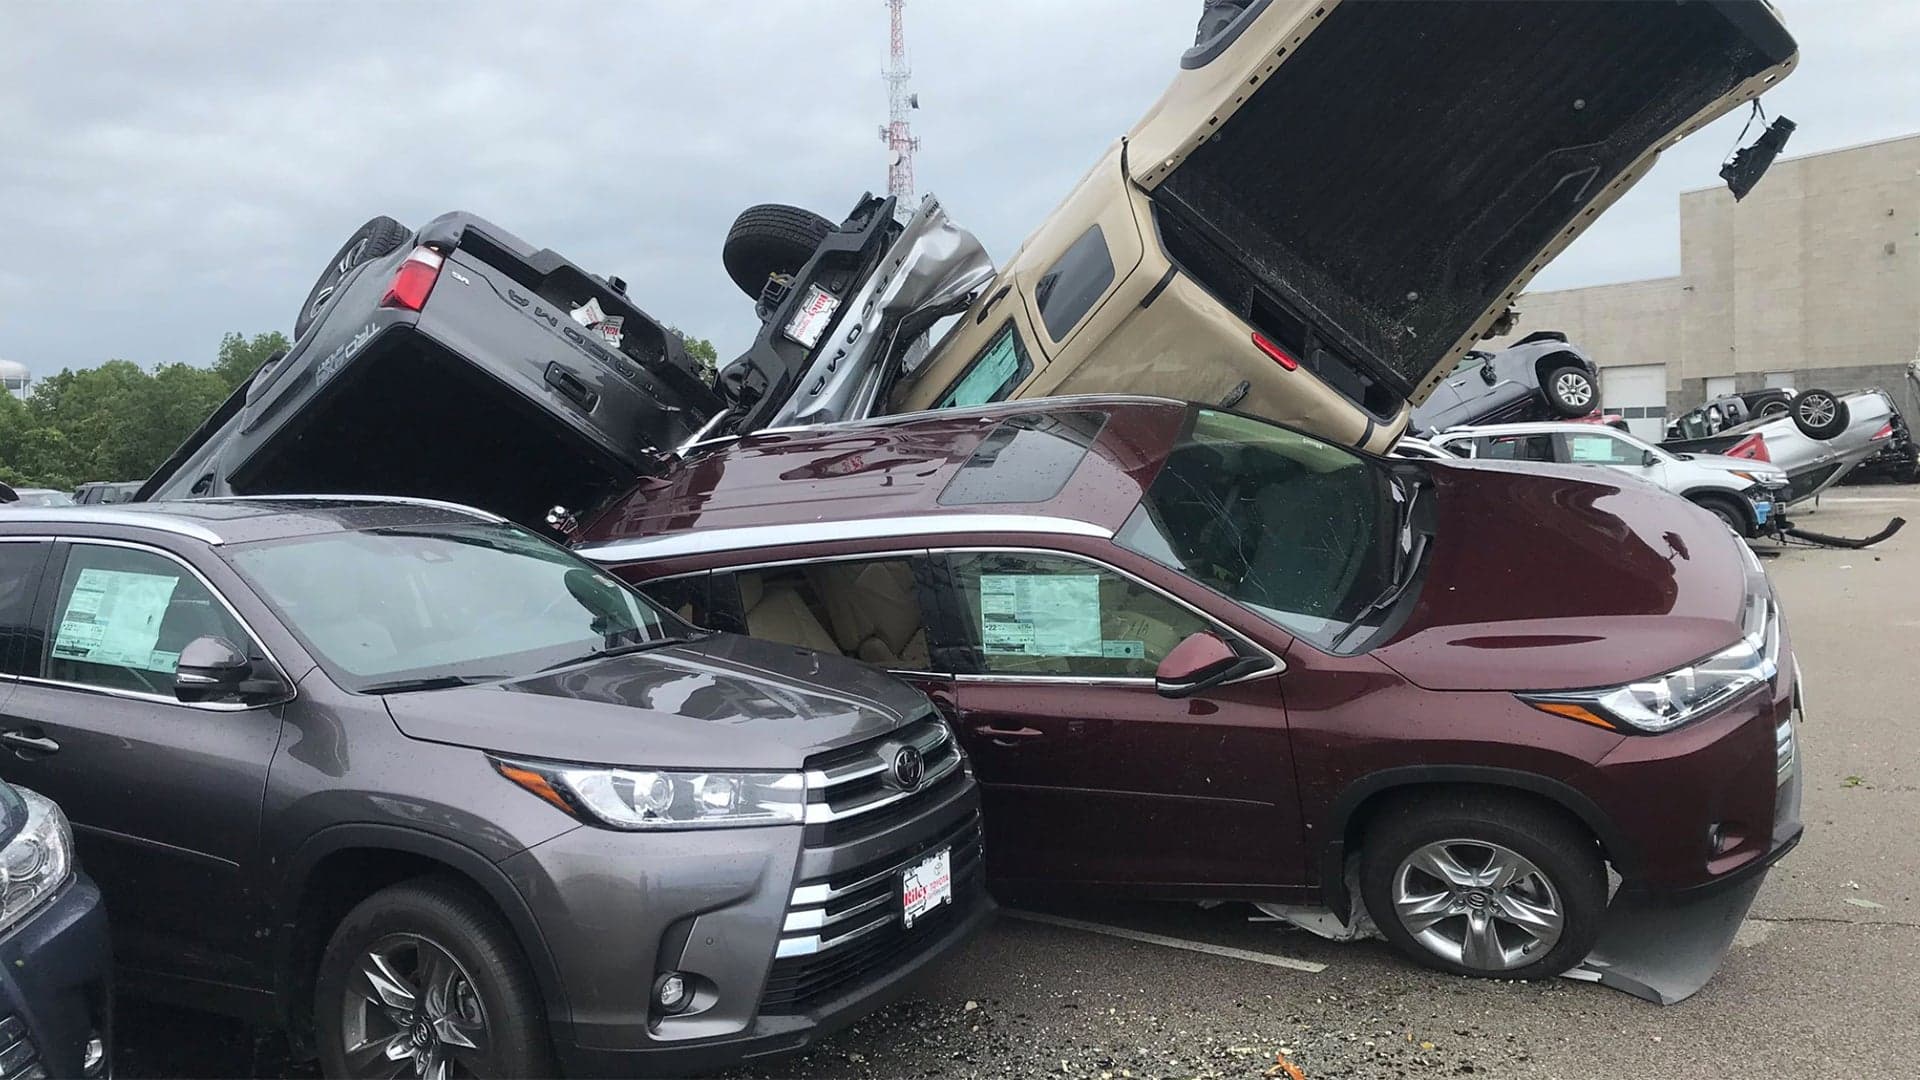 Missouri Tornado Destroys 500 Cars in ‘Direct Hit’ at Chevrolet and Toyota Dealerships